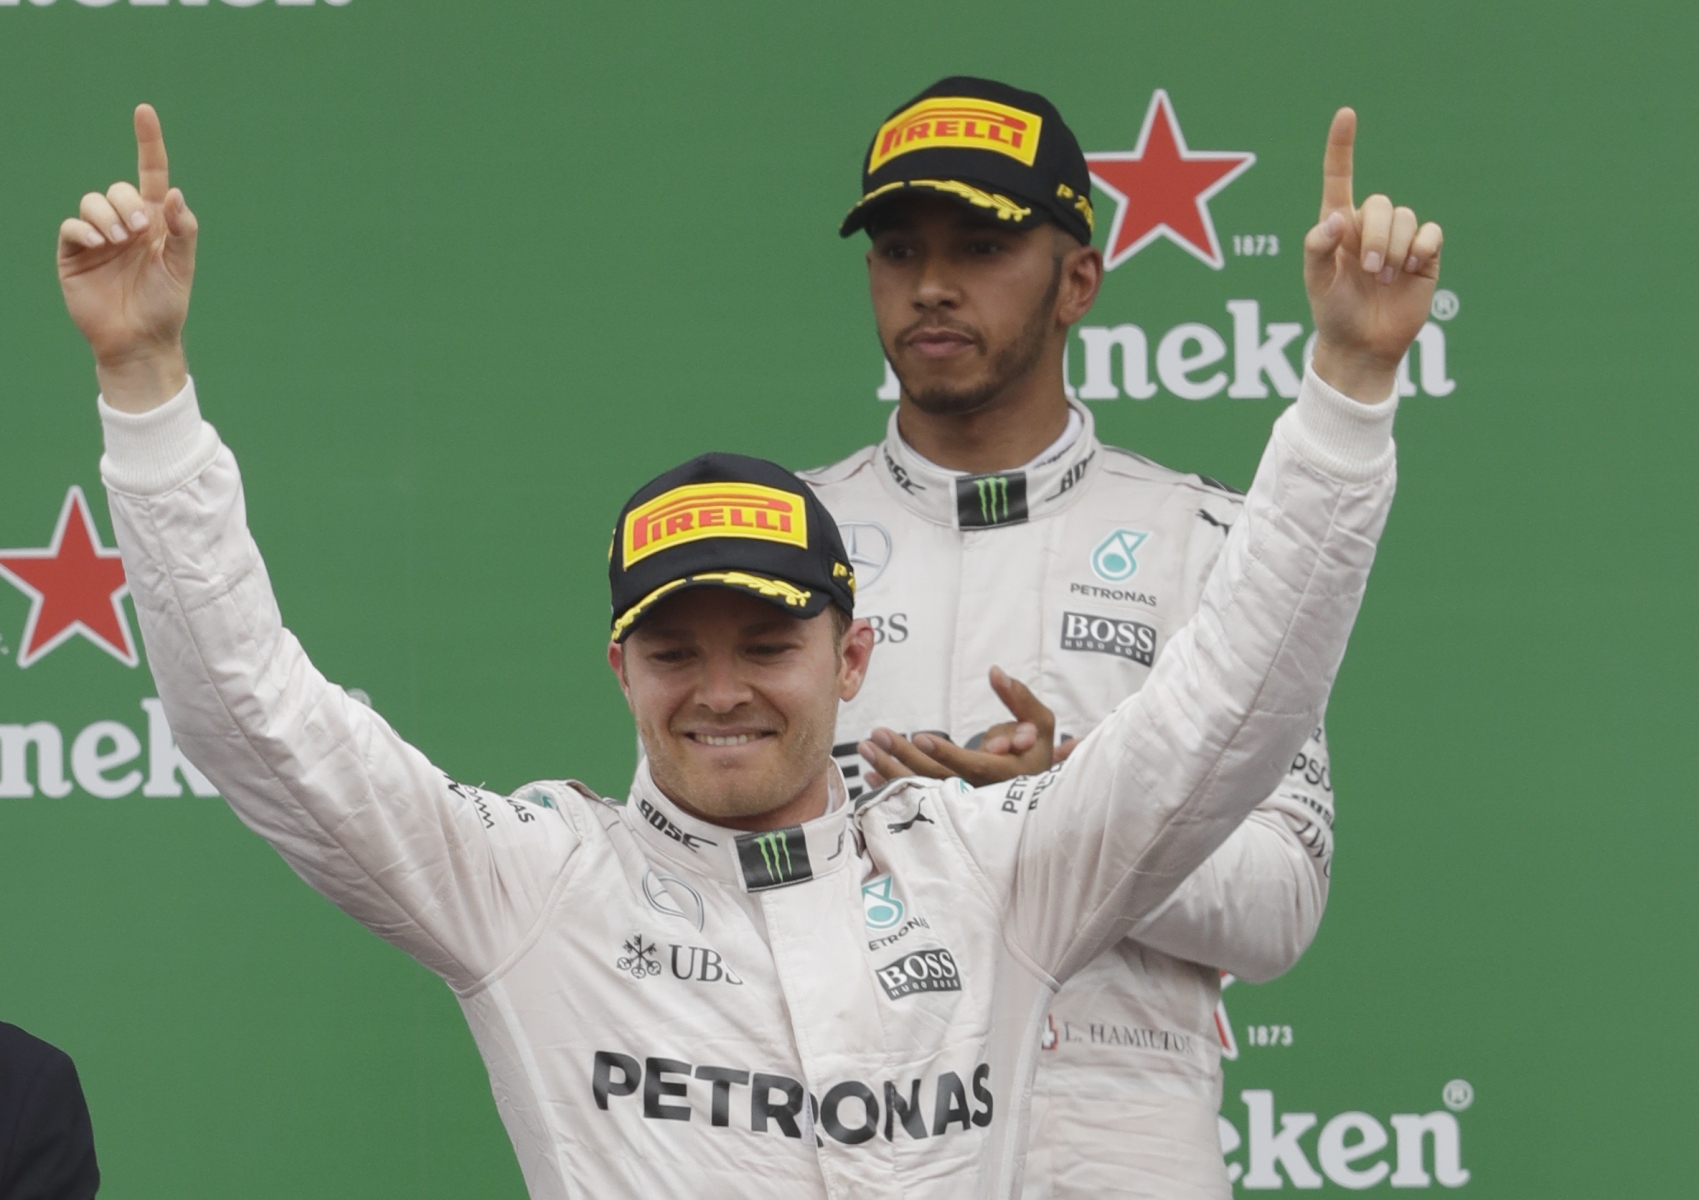 Mercedes driver Nico Rosberg of Germany, left, celebrates as second placed Mercedes driver Lewis Hamilton of Britain applaudes on the podium the Italian Formula One Grand Prix at the Monza racetrack, Italy, Sunday, Sept. 4, 2016. (AP Photo/Luca Bruno) Italy F1 GP Auto Racing